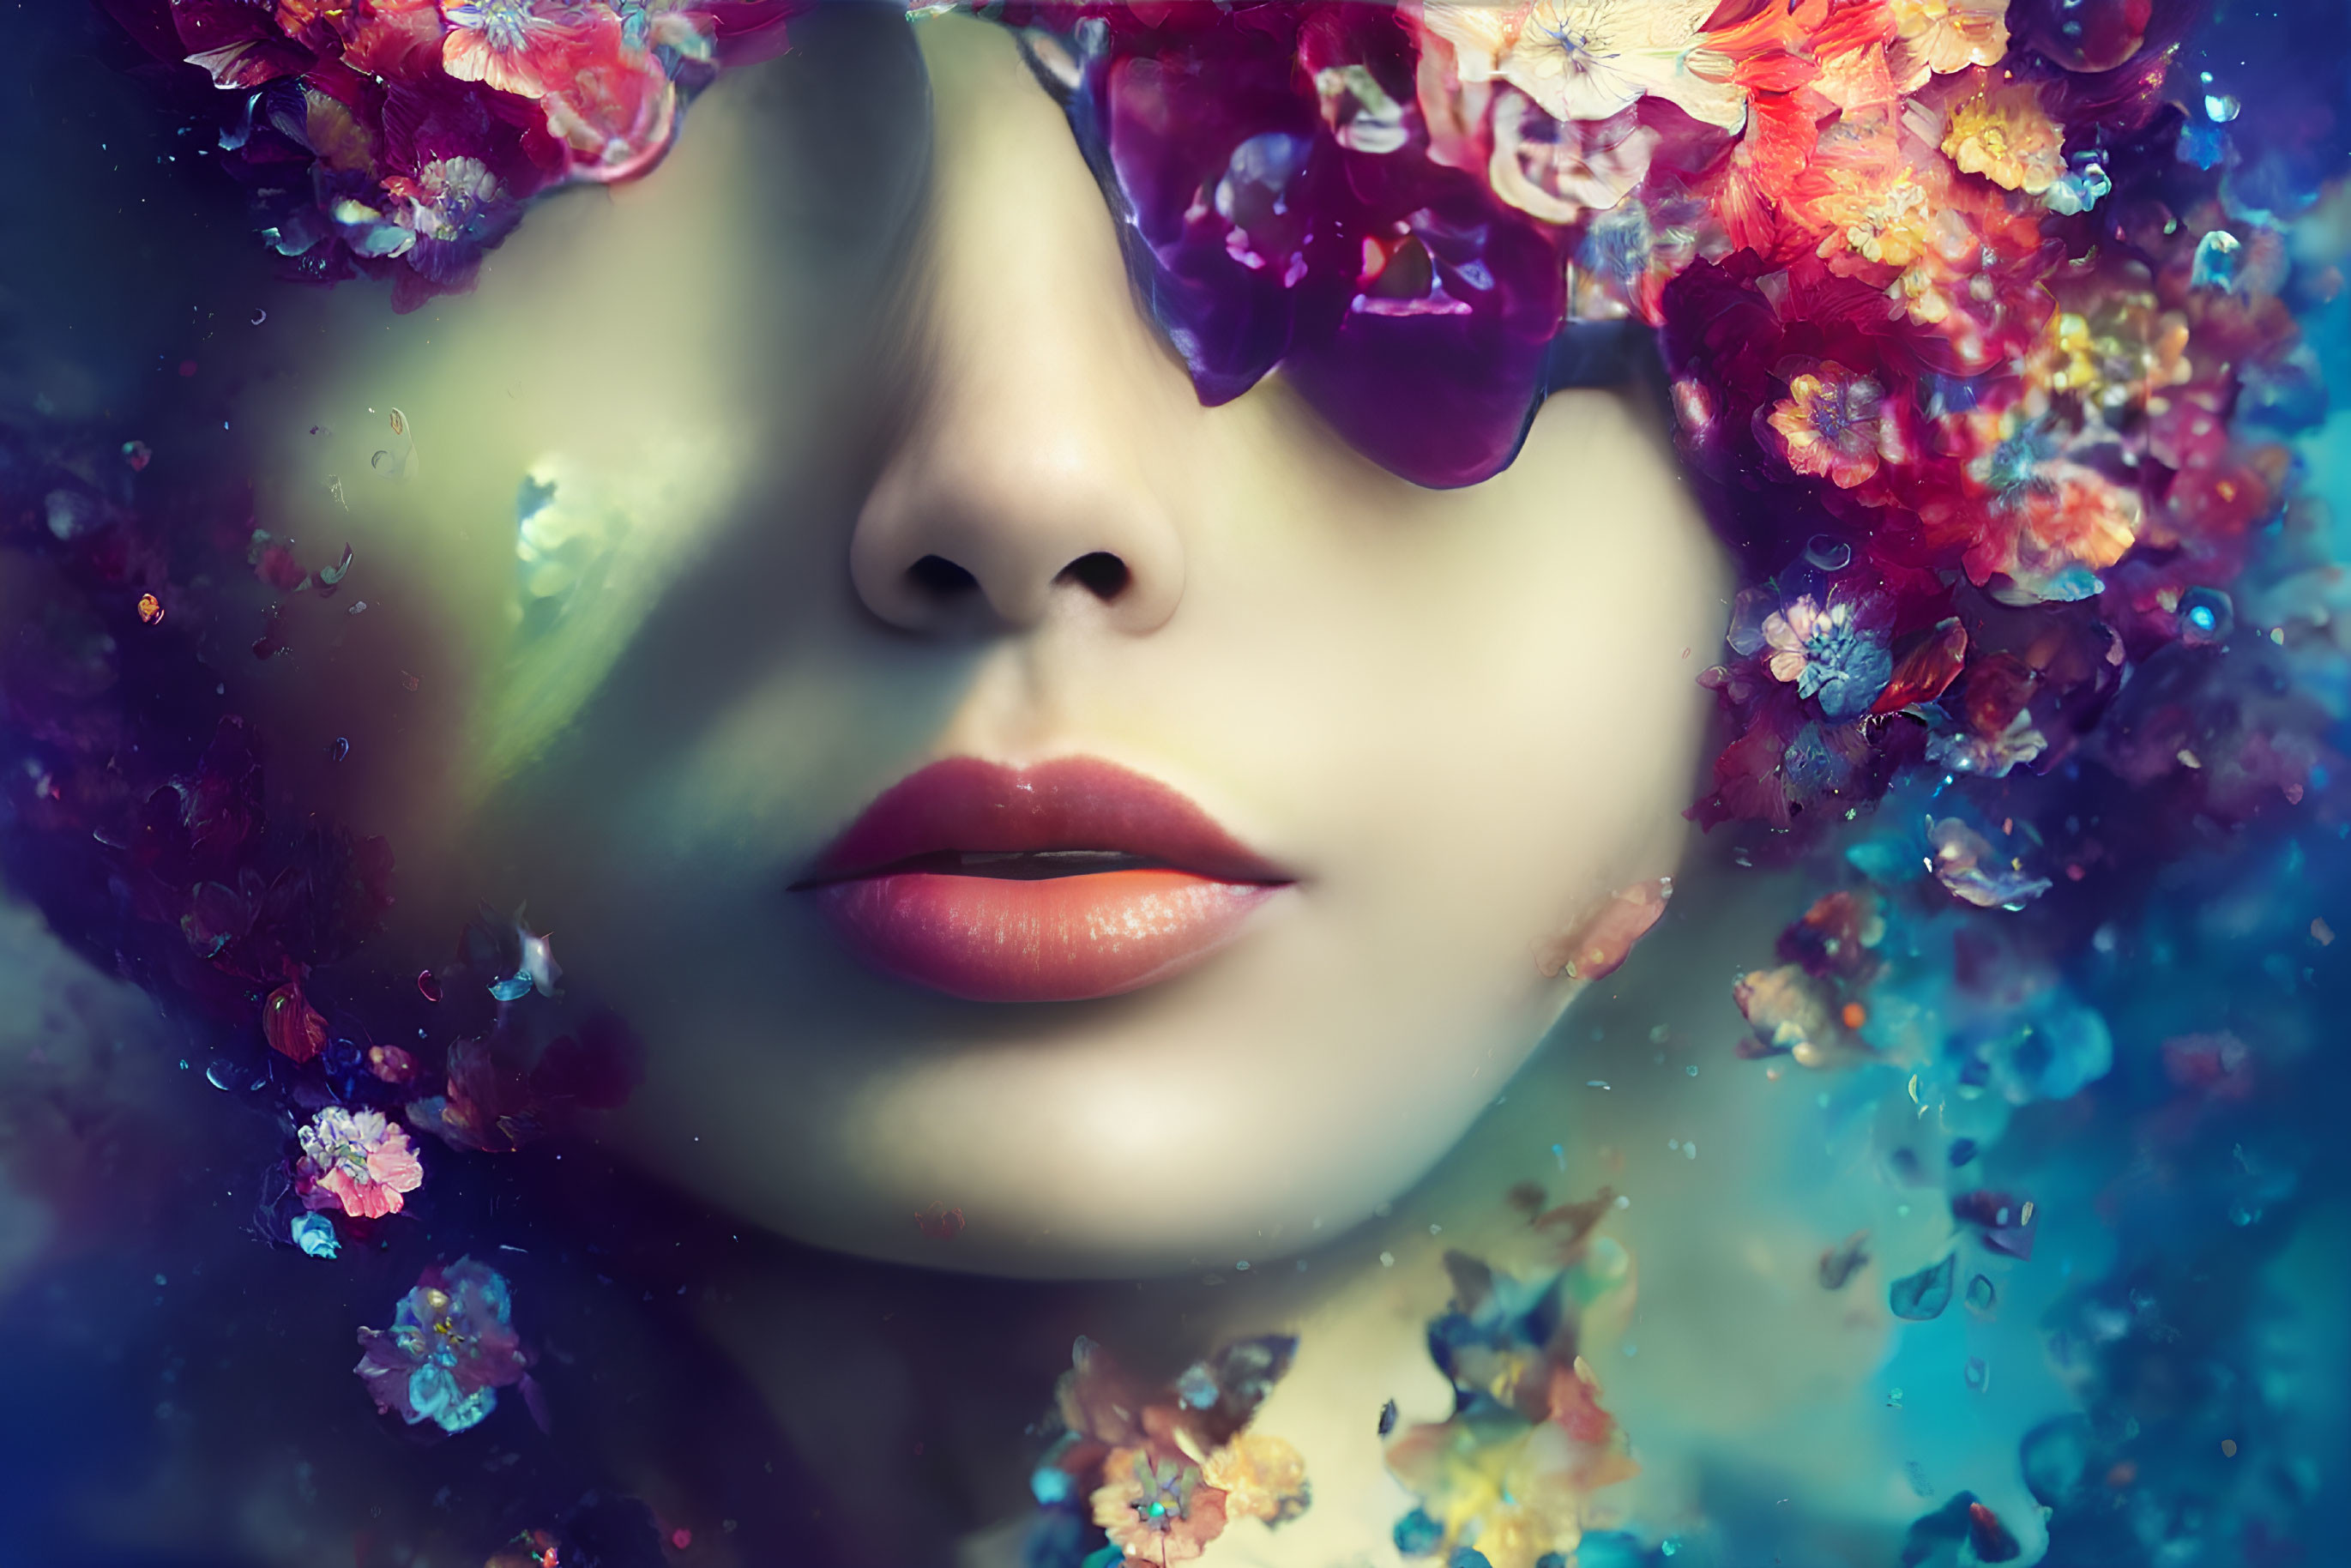 Woman's face submerged in water with vibrant flowers - Dreamlike image